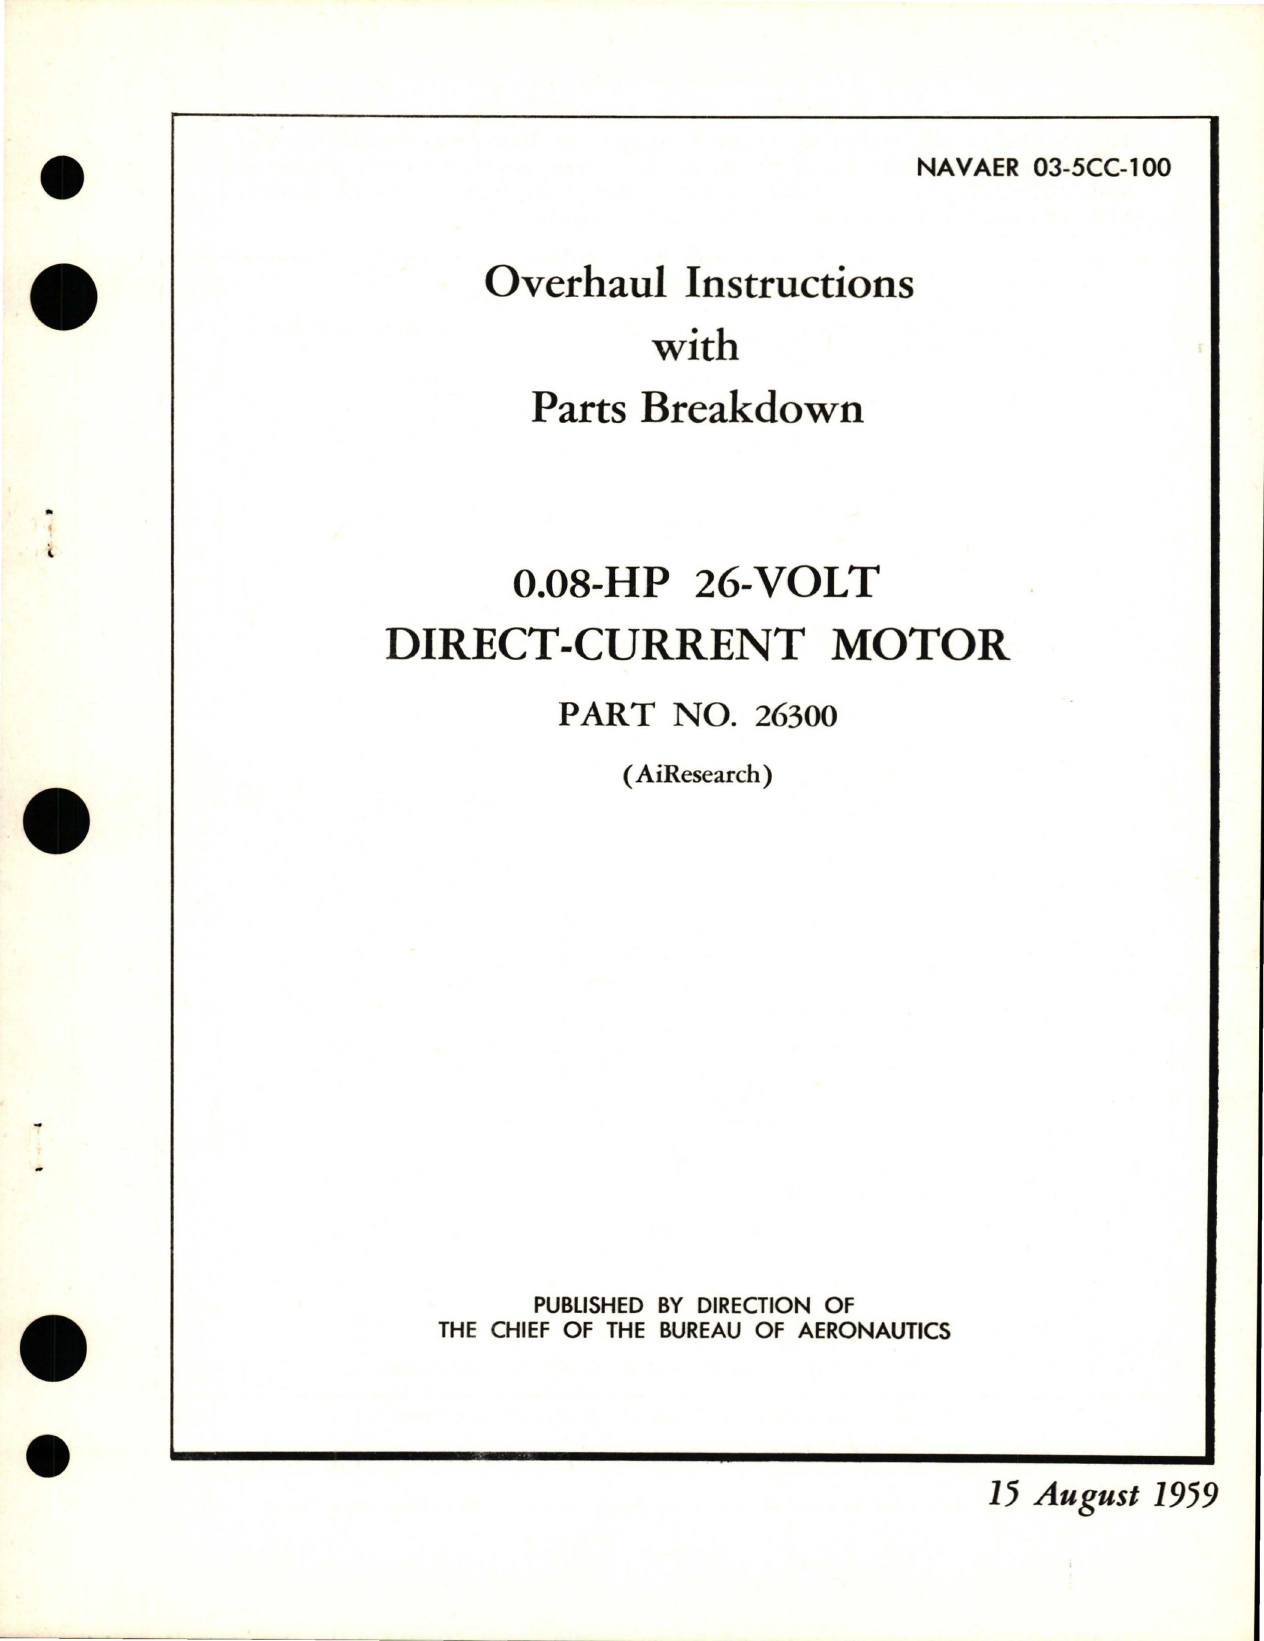 Sample page 1 from AirCorps Library document: Overhaul Instructions with Parts Breakdown for Direct-Current Motor 0.08 HP 26 Volt - Part 26300